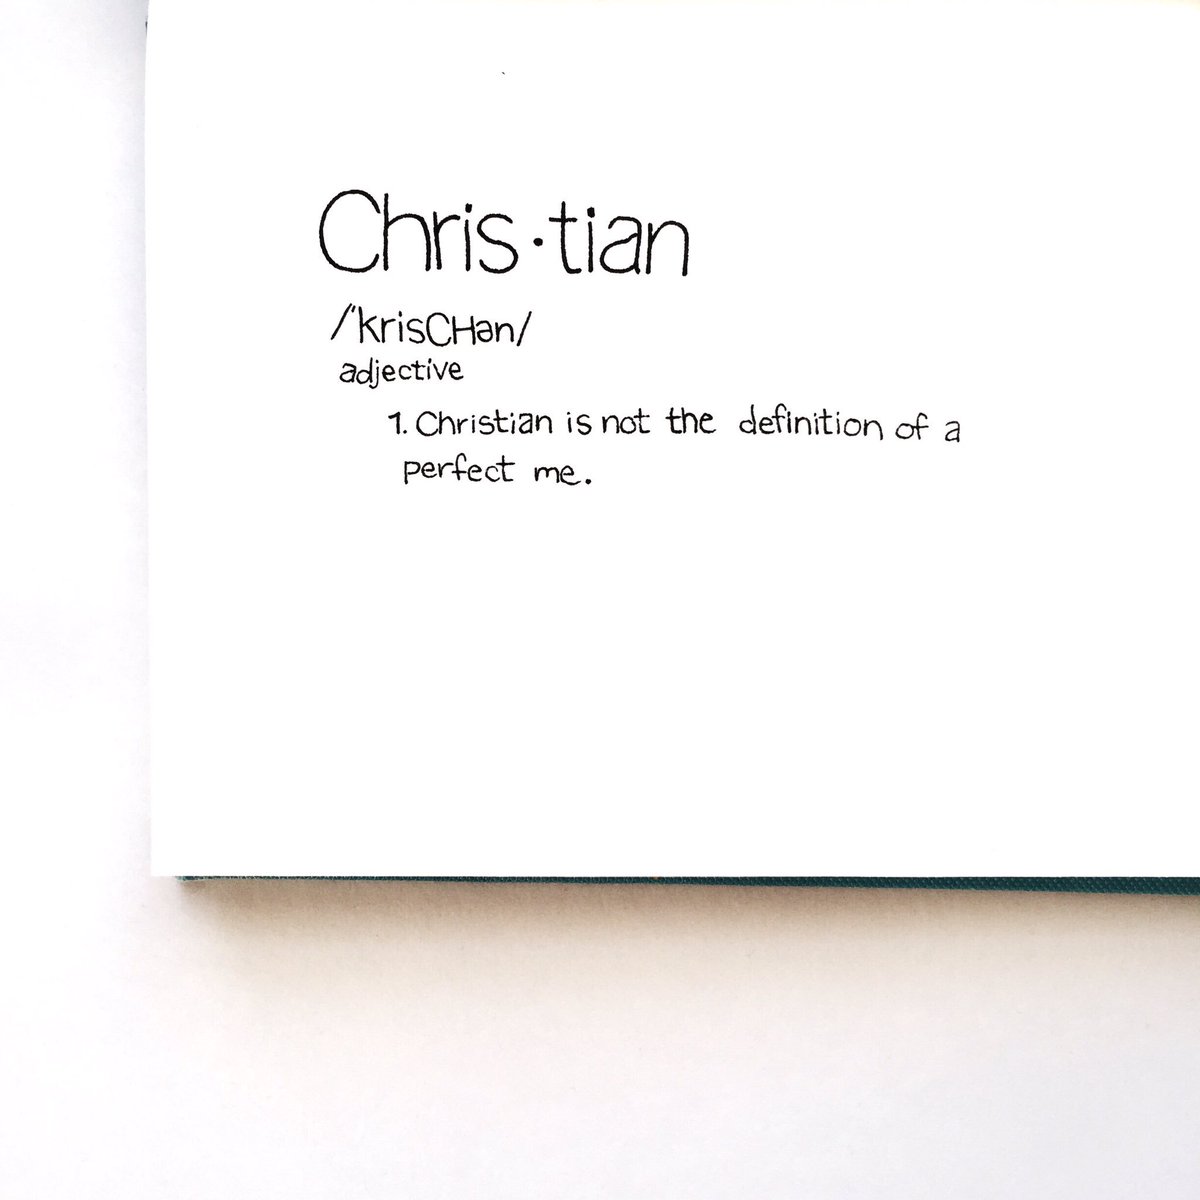 kiara on twitter: "christian is not the definition of a perfect me